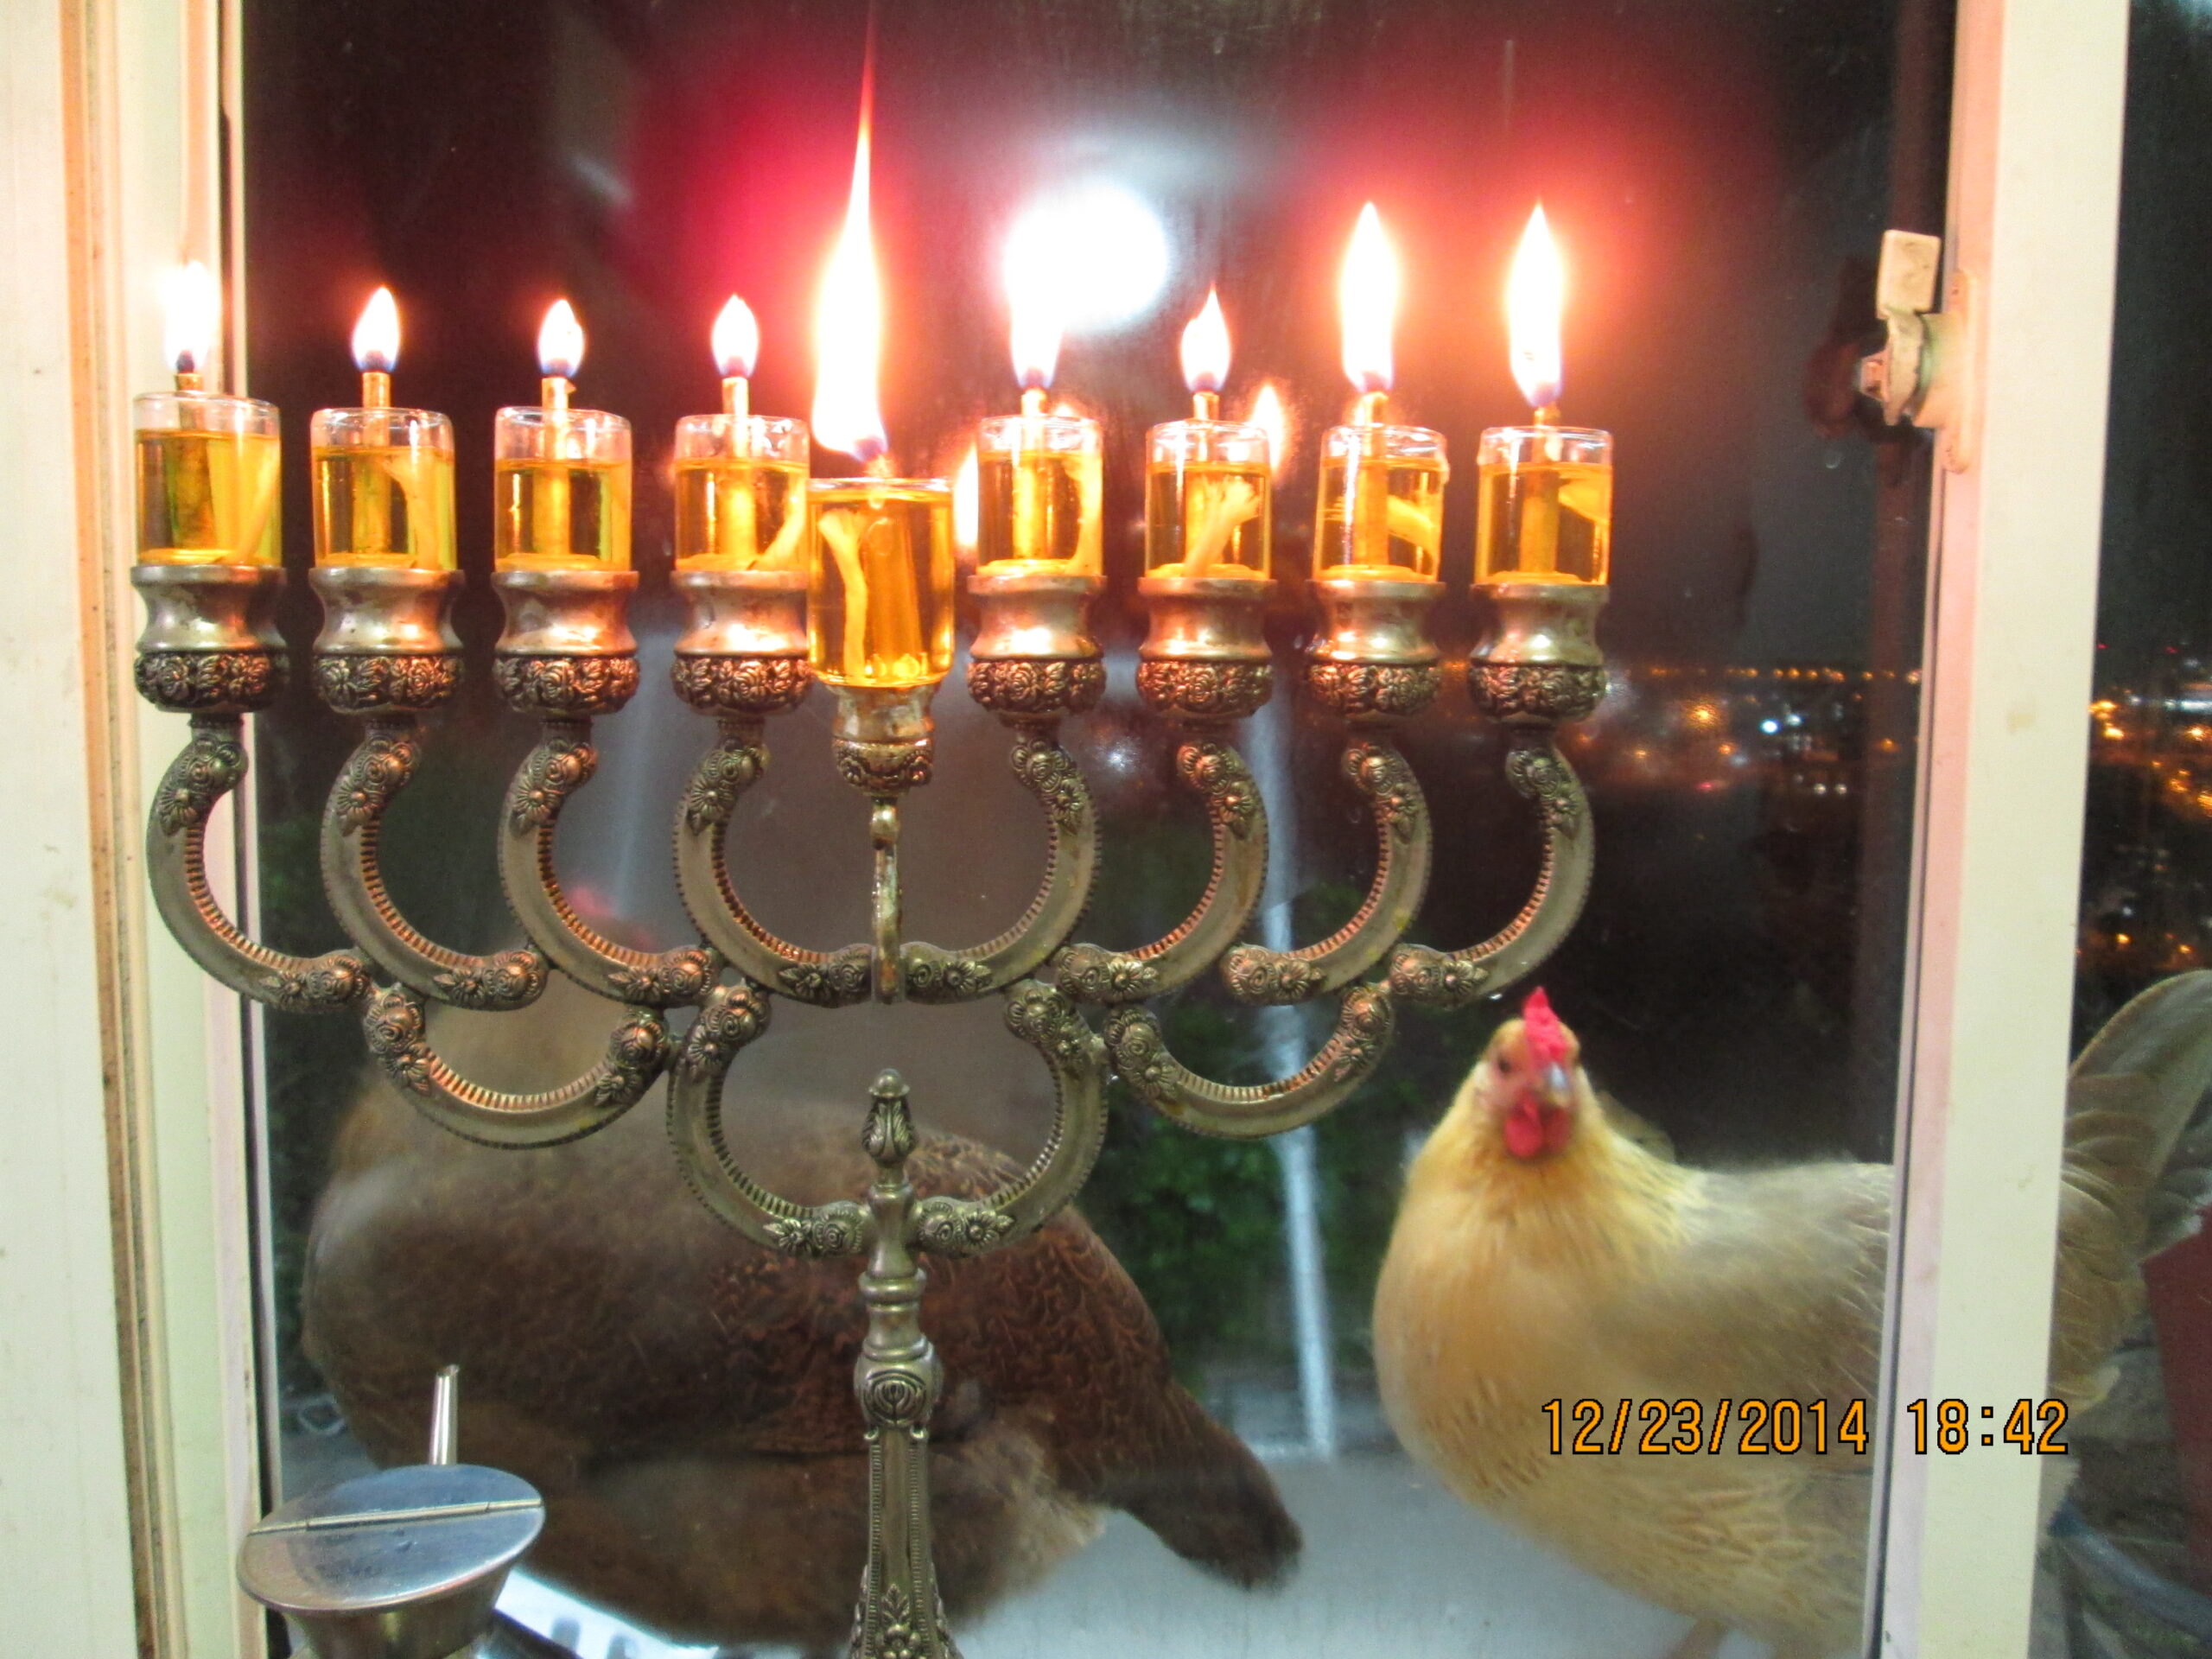 Hanukkah-The 8th night with Chickens. The orange one is "Shwarma", the dark one is "Black Bird".